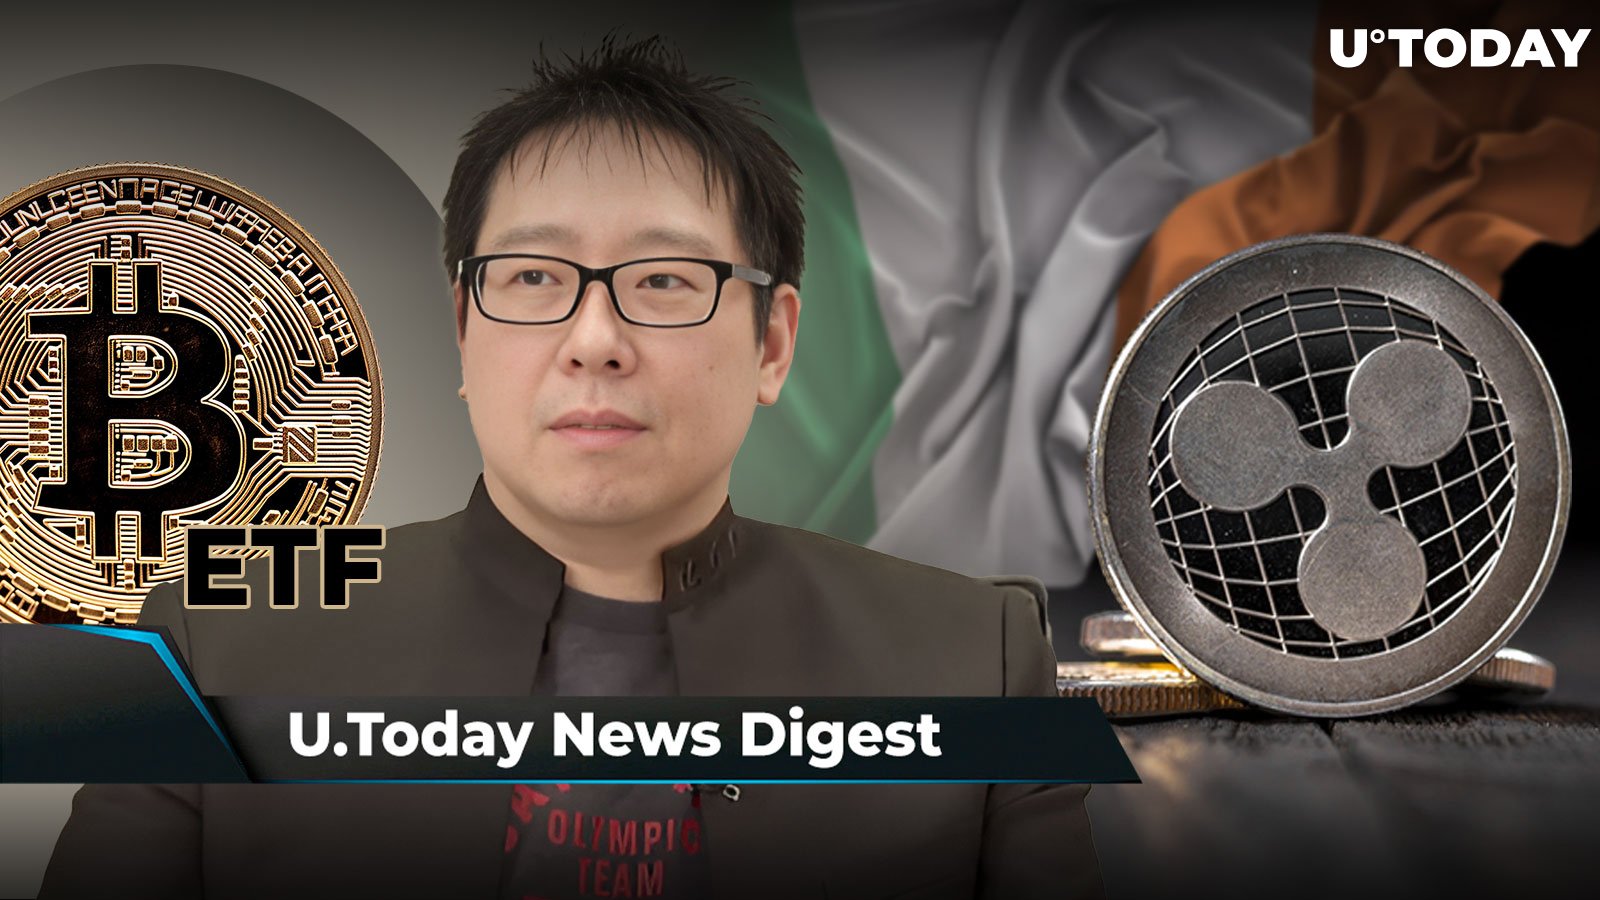 Ripple Officially Approved by Central Bank of Ireland, Samson Mow Makes Critical Bitcoin ETF Predictions, DOGE, SHIB Holders to Receive Big Christmas Giveaway: Crypto News Digest by U.Today